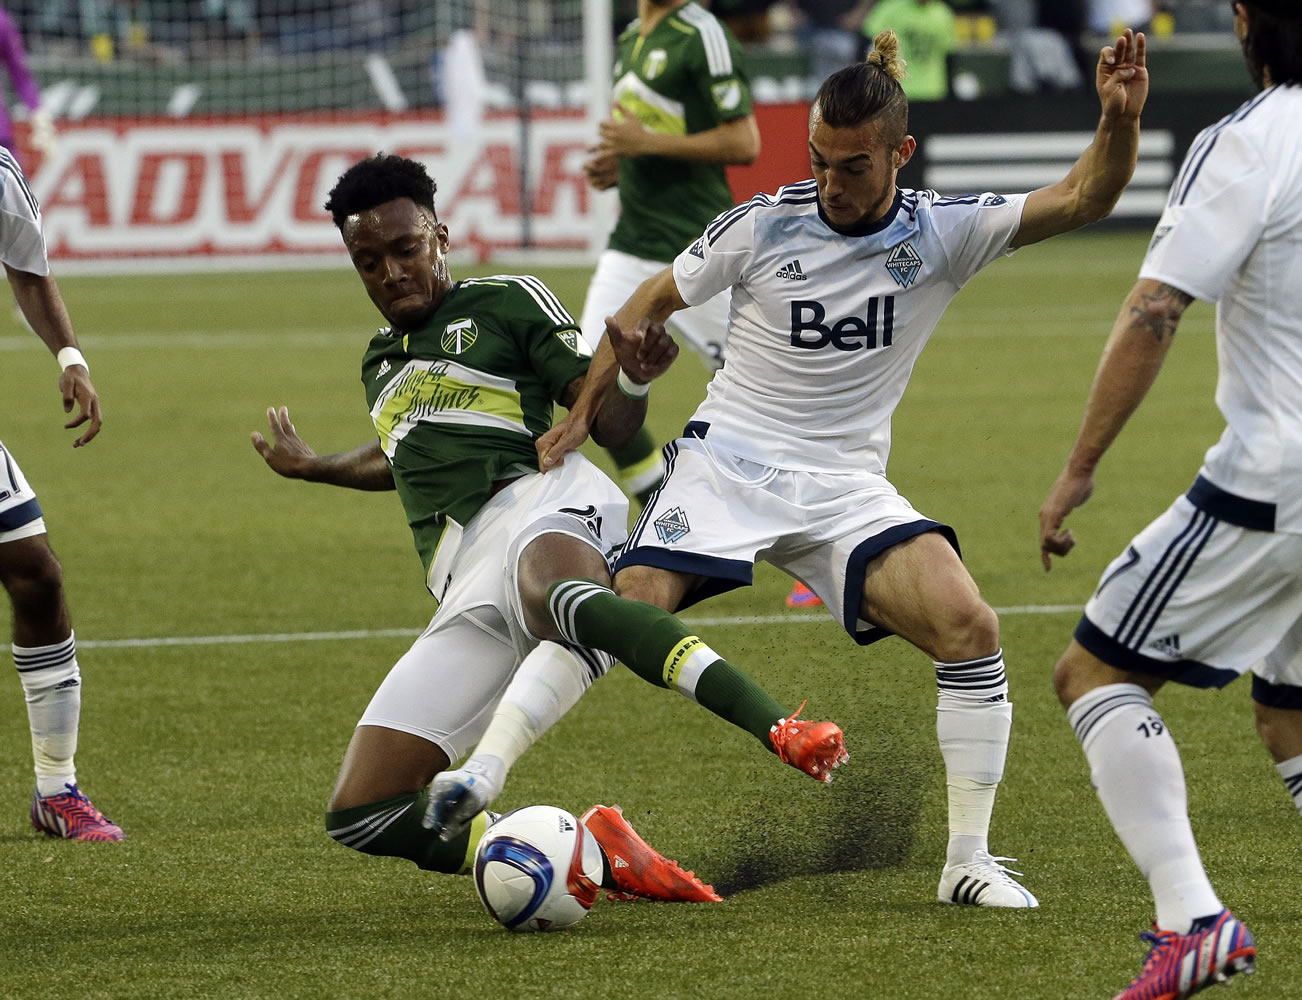 Portland Timbers forward Rodney Wallace, left, battles for the ball against Vancouver Whitecaps midfielder Russell Teibert during the first half of an MLS soccer game in Portland, Ore., Saturday, May 2, 2015.